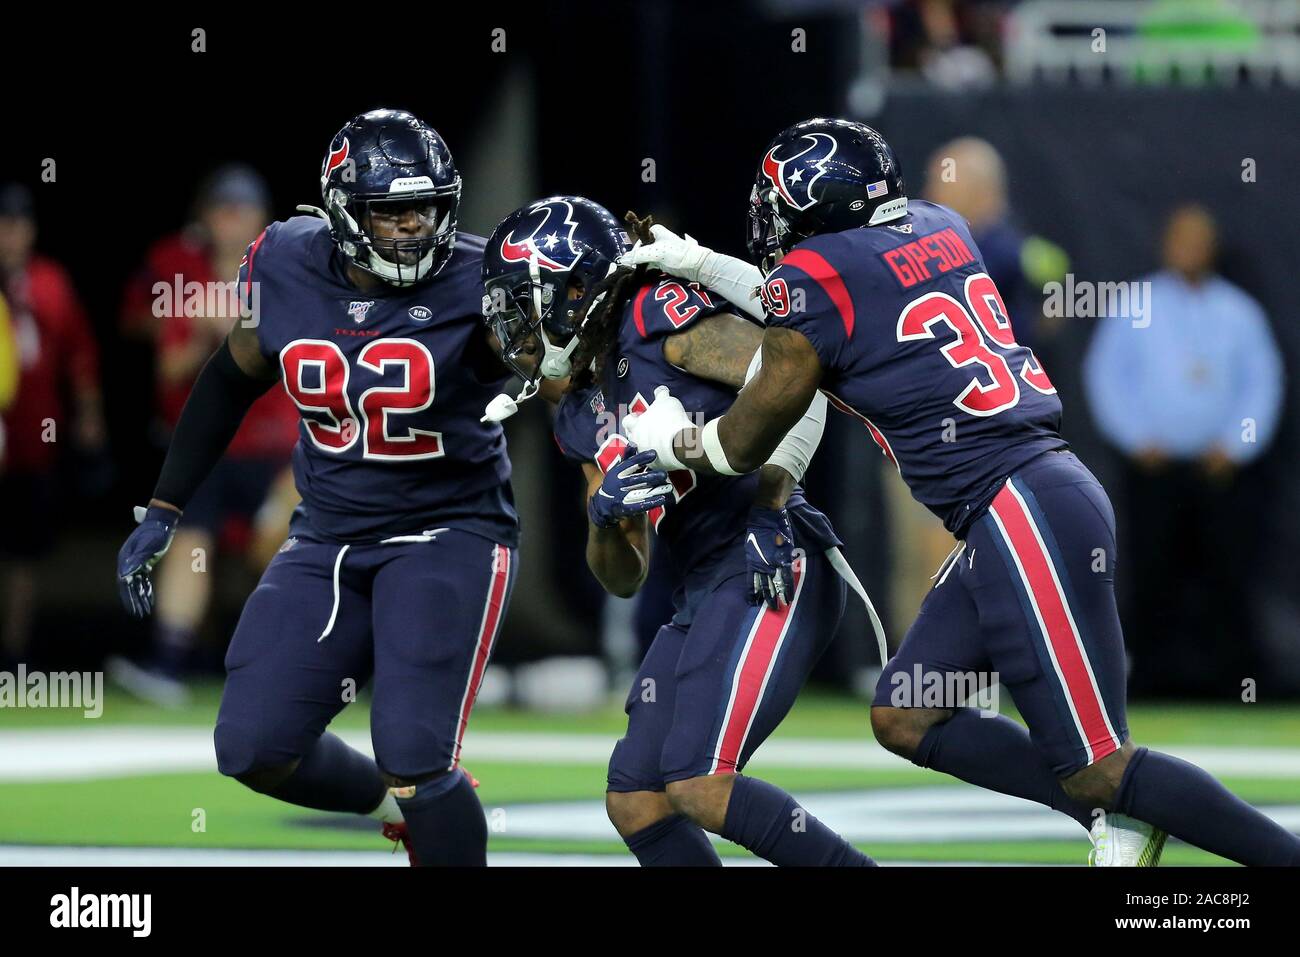 Houston, Texas, USA. 1st Dec, 2019. Houston Texans cornerback Bradley Roby (21) is congratulated by teammates after an interception during the first quarter of the NFL regular season game between the Houston Texans and the New England Patriots at NRG Stadium in Houston, TX on December 1, 2019. Credit: Erik Williams/ZUMA Wire/Alamy Live News Stock Photo